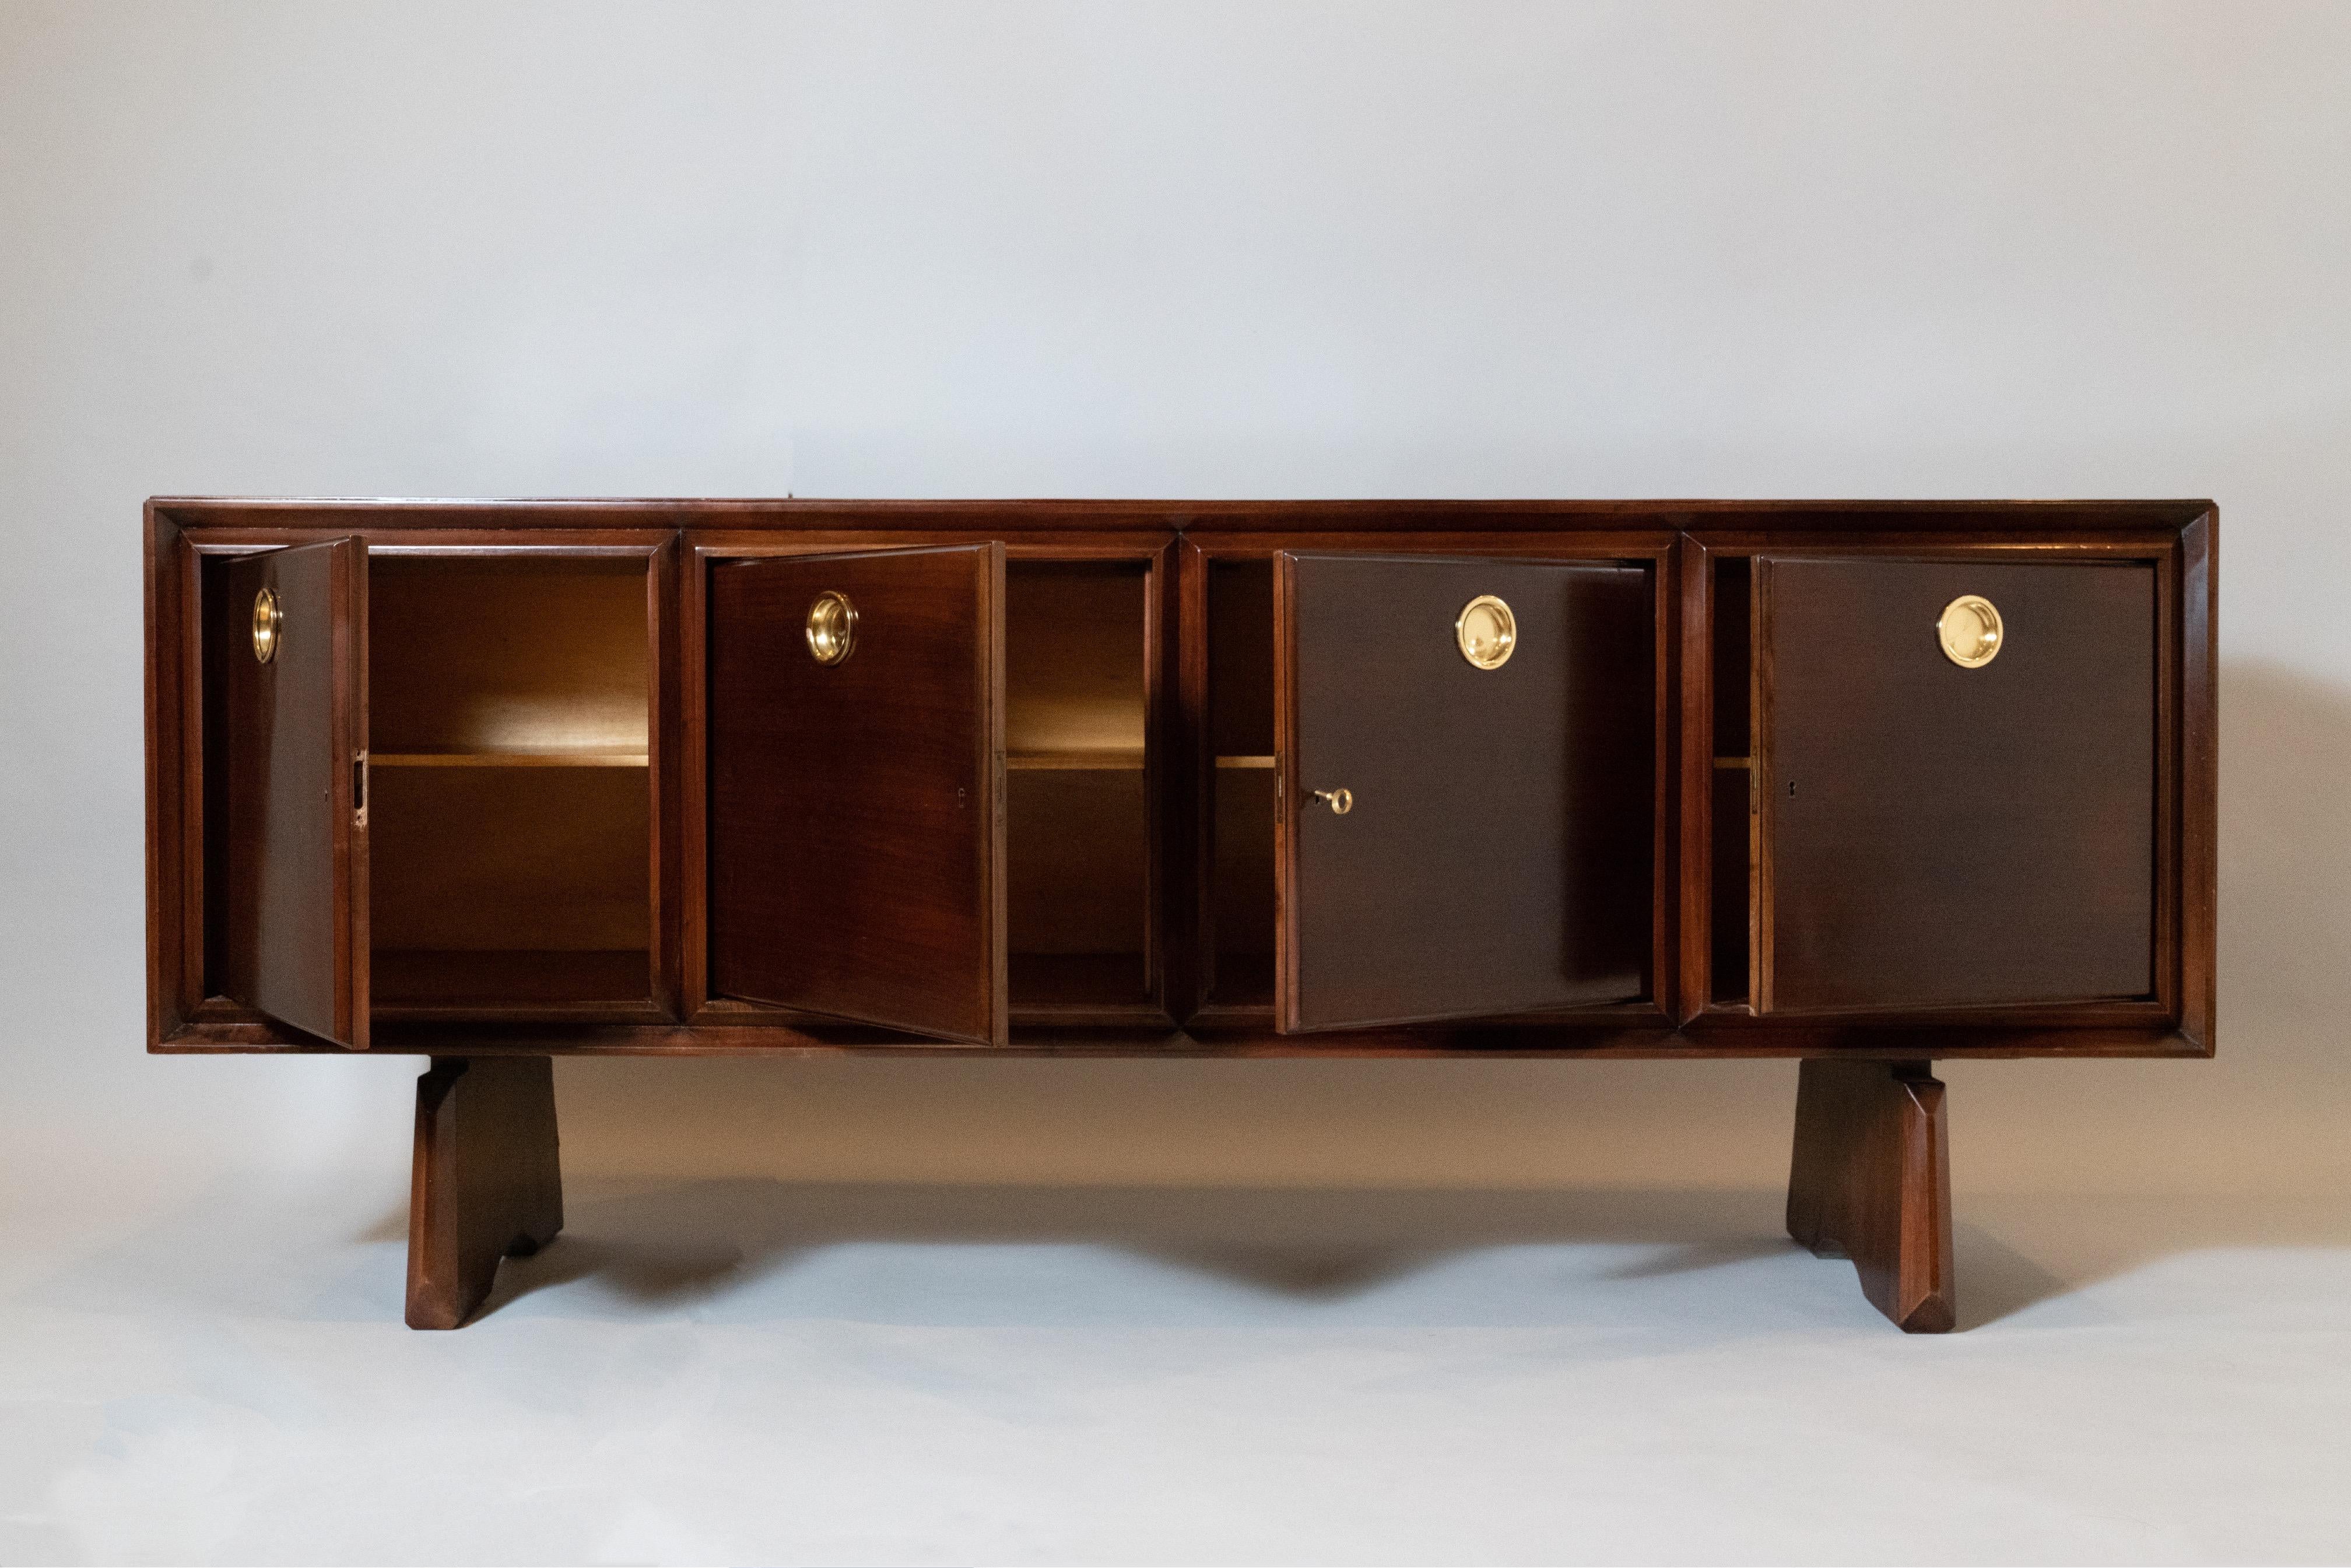 Paolo Buffa: Imposing Four-Door Cabinet in Walnut and Polished Brass, Italy 1950 For Sale 6